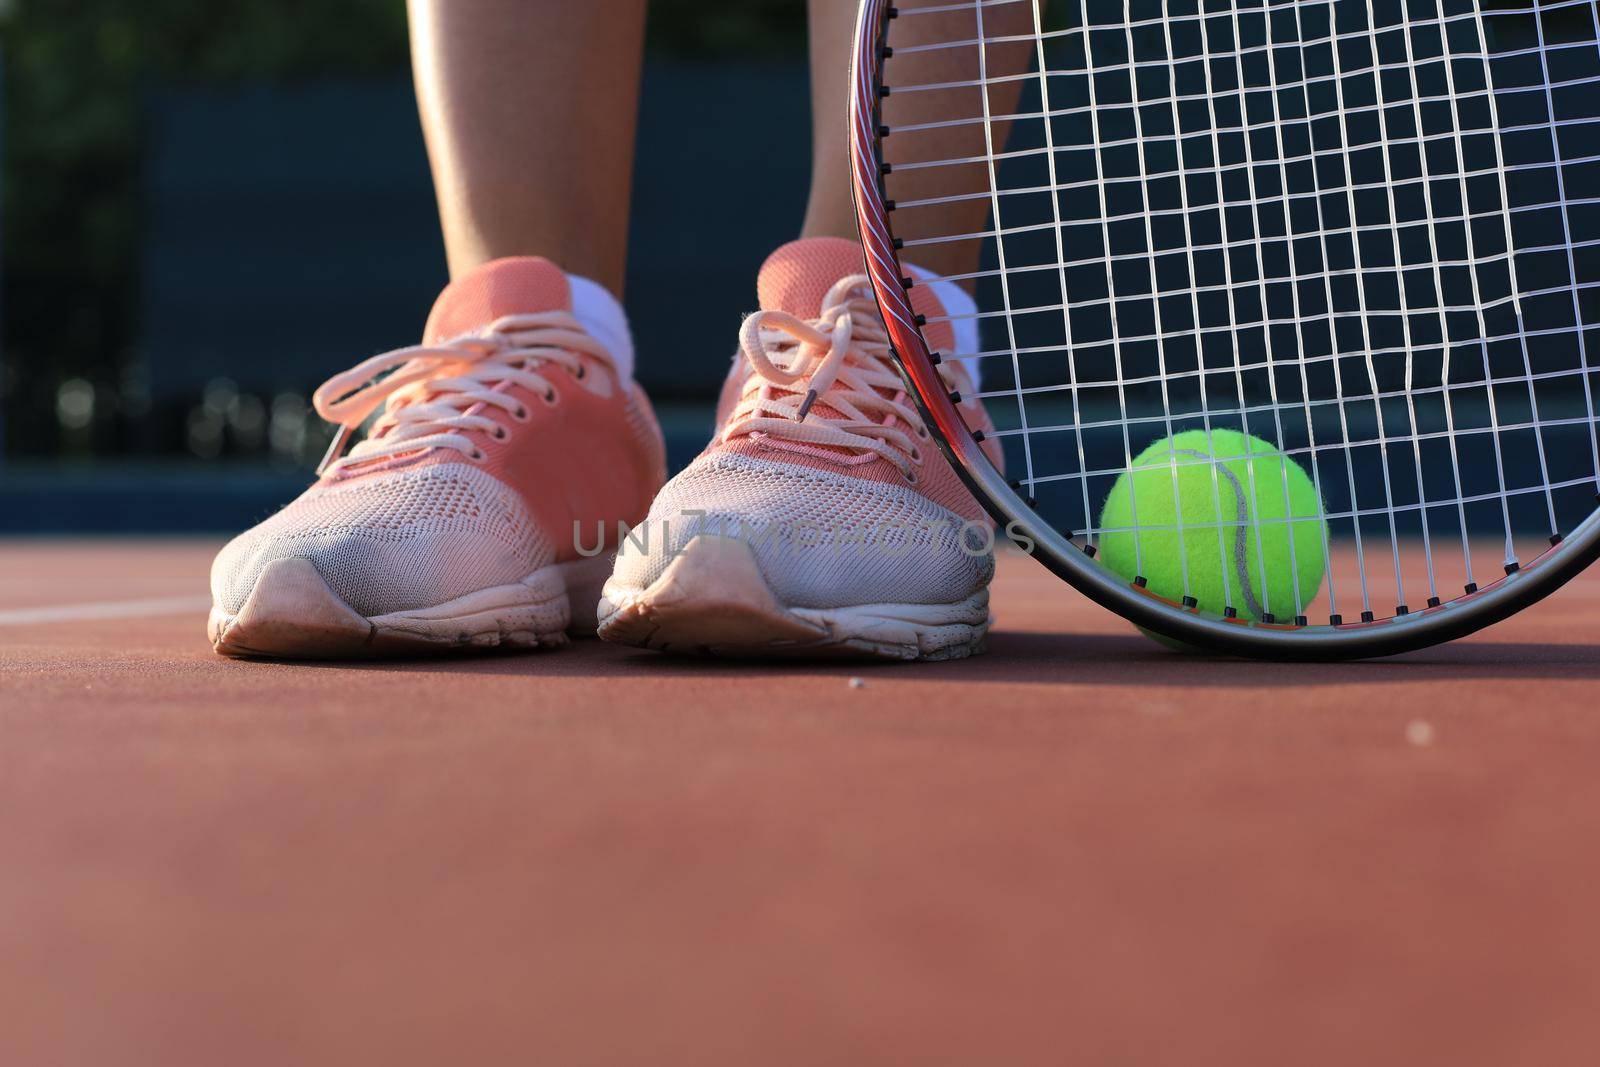 Tennis racket and the ball on tennis court